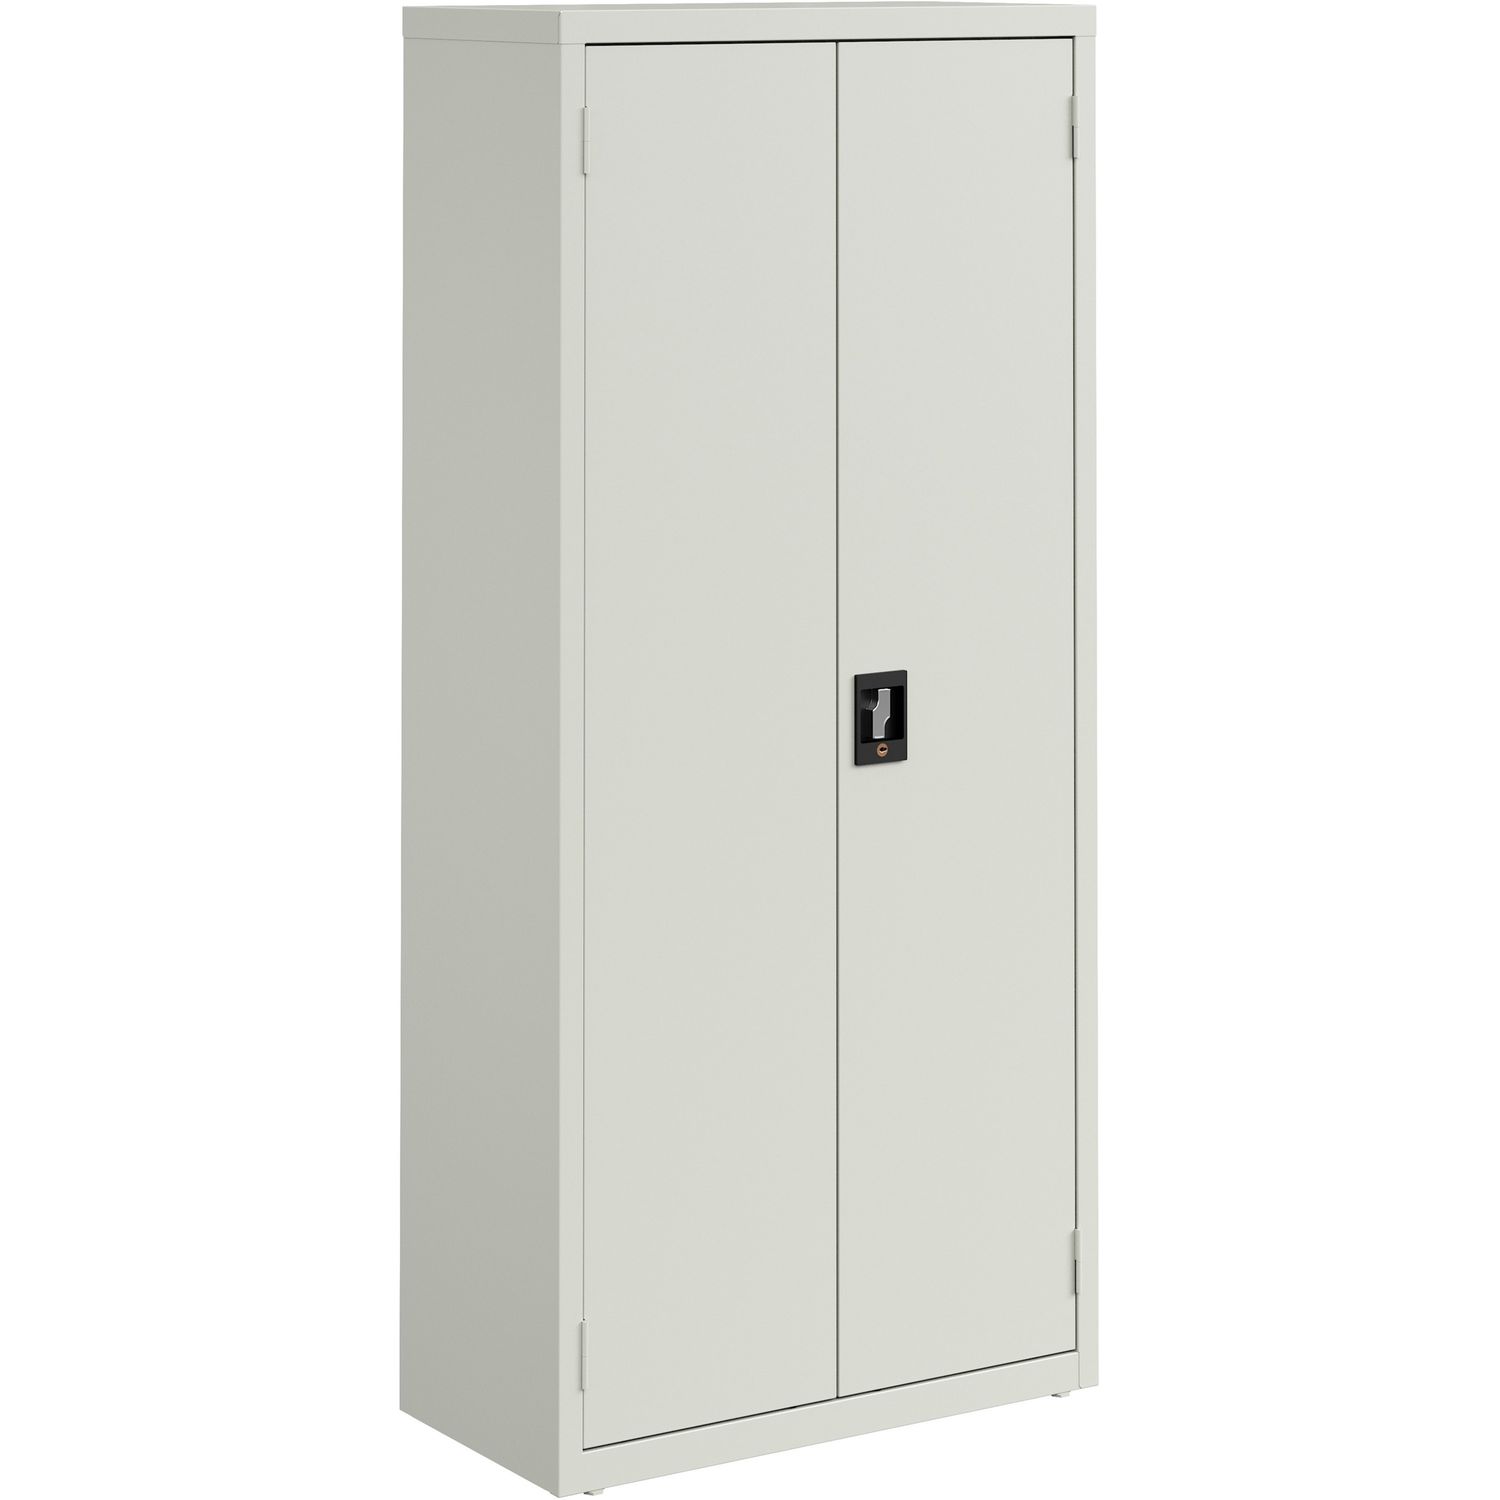 Slimline Storage Cabinet 30" x 42" x 66", 4 x Shelf(ves), 720 lb Load Capacity, Durable, Welded, Nonporous Surface, Recessed Handle, Removable Lock, Locking System, Light Gray, Baked Enamel, Steel